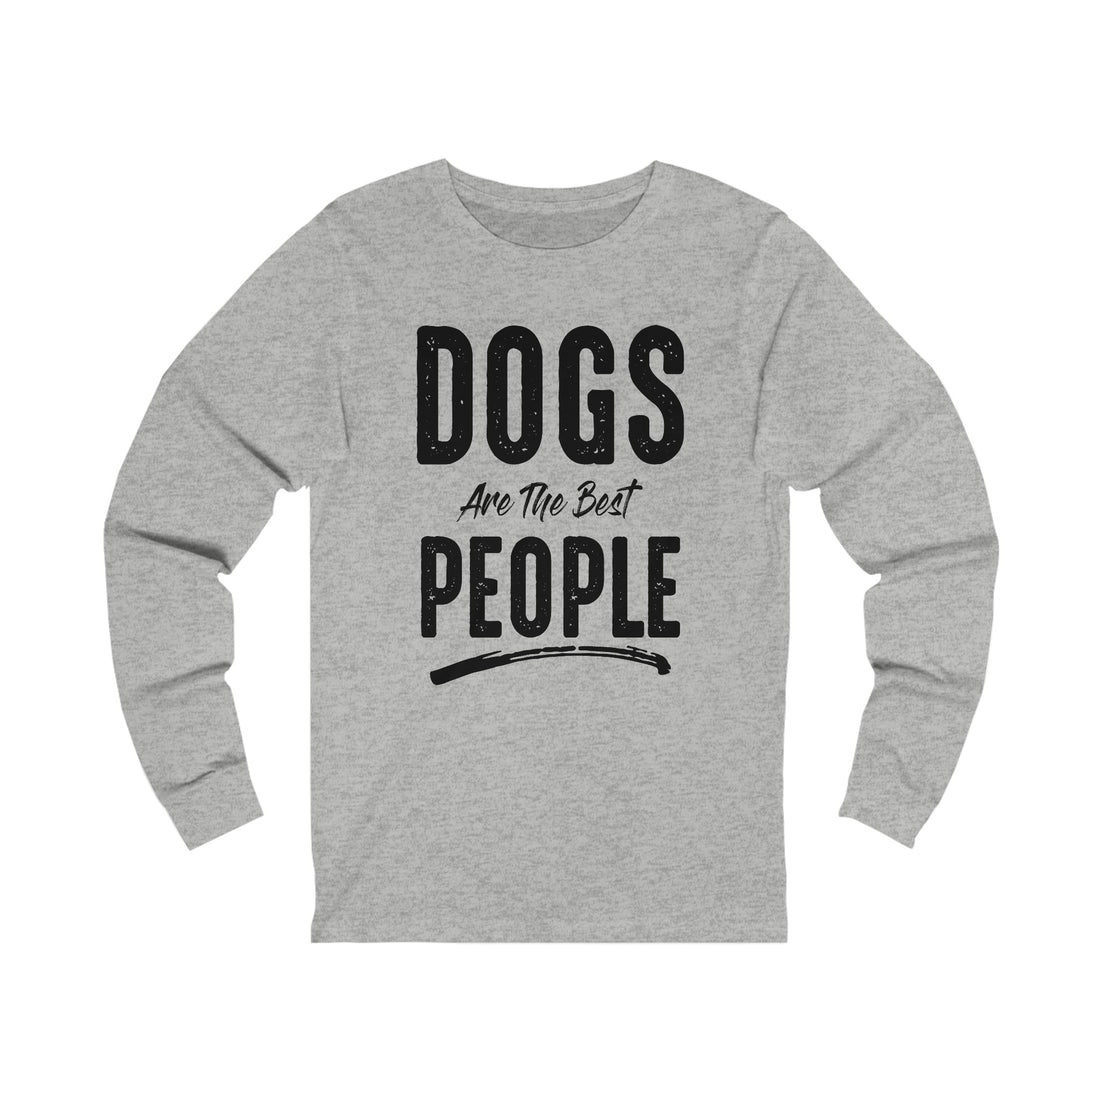 Dogs Are The Best People - Unisex Jersey Long Sleeve Tee